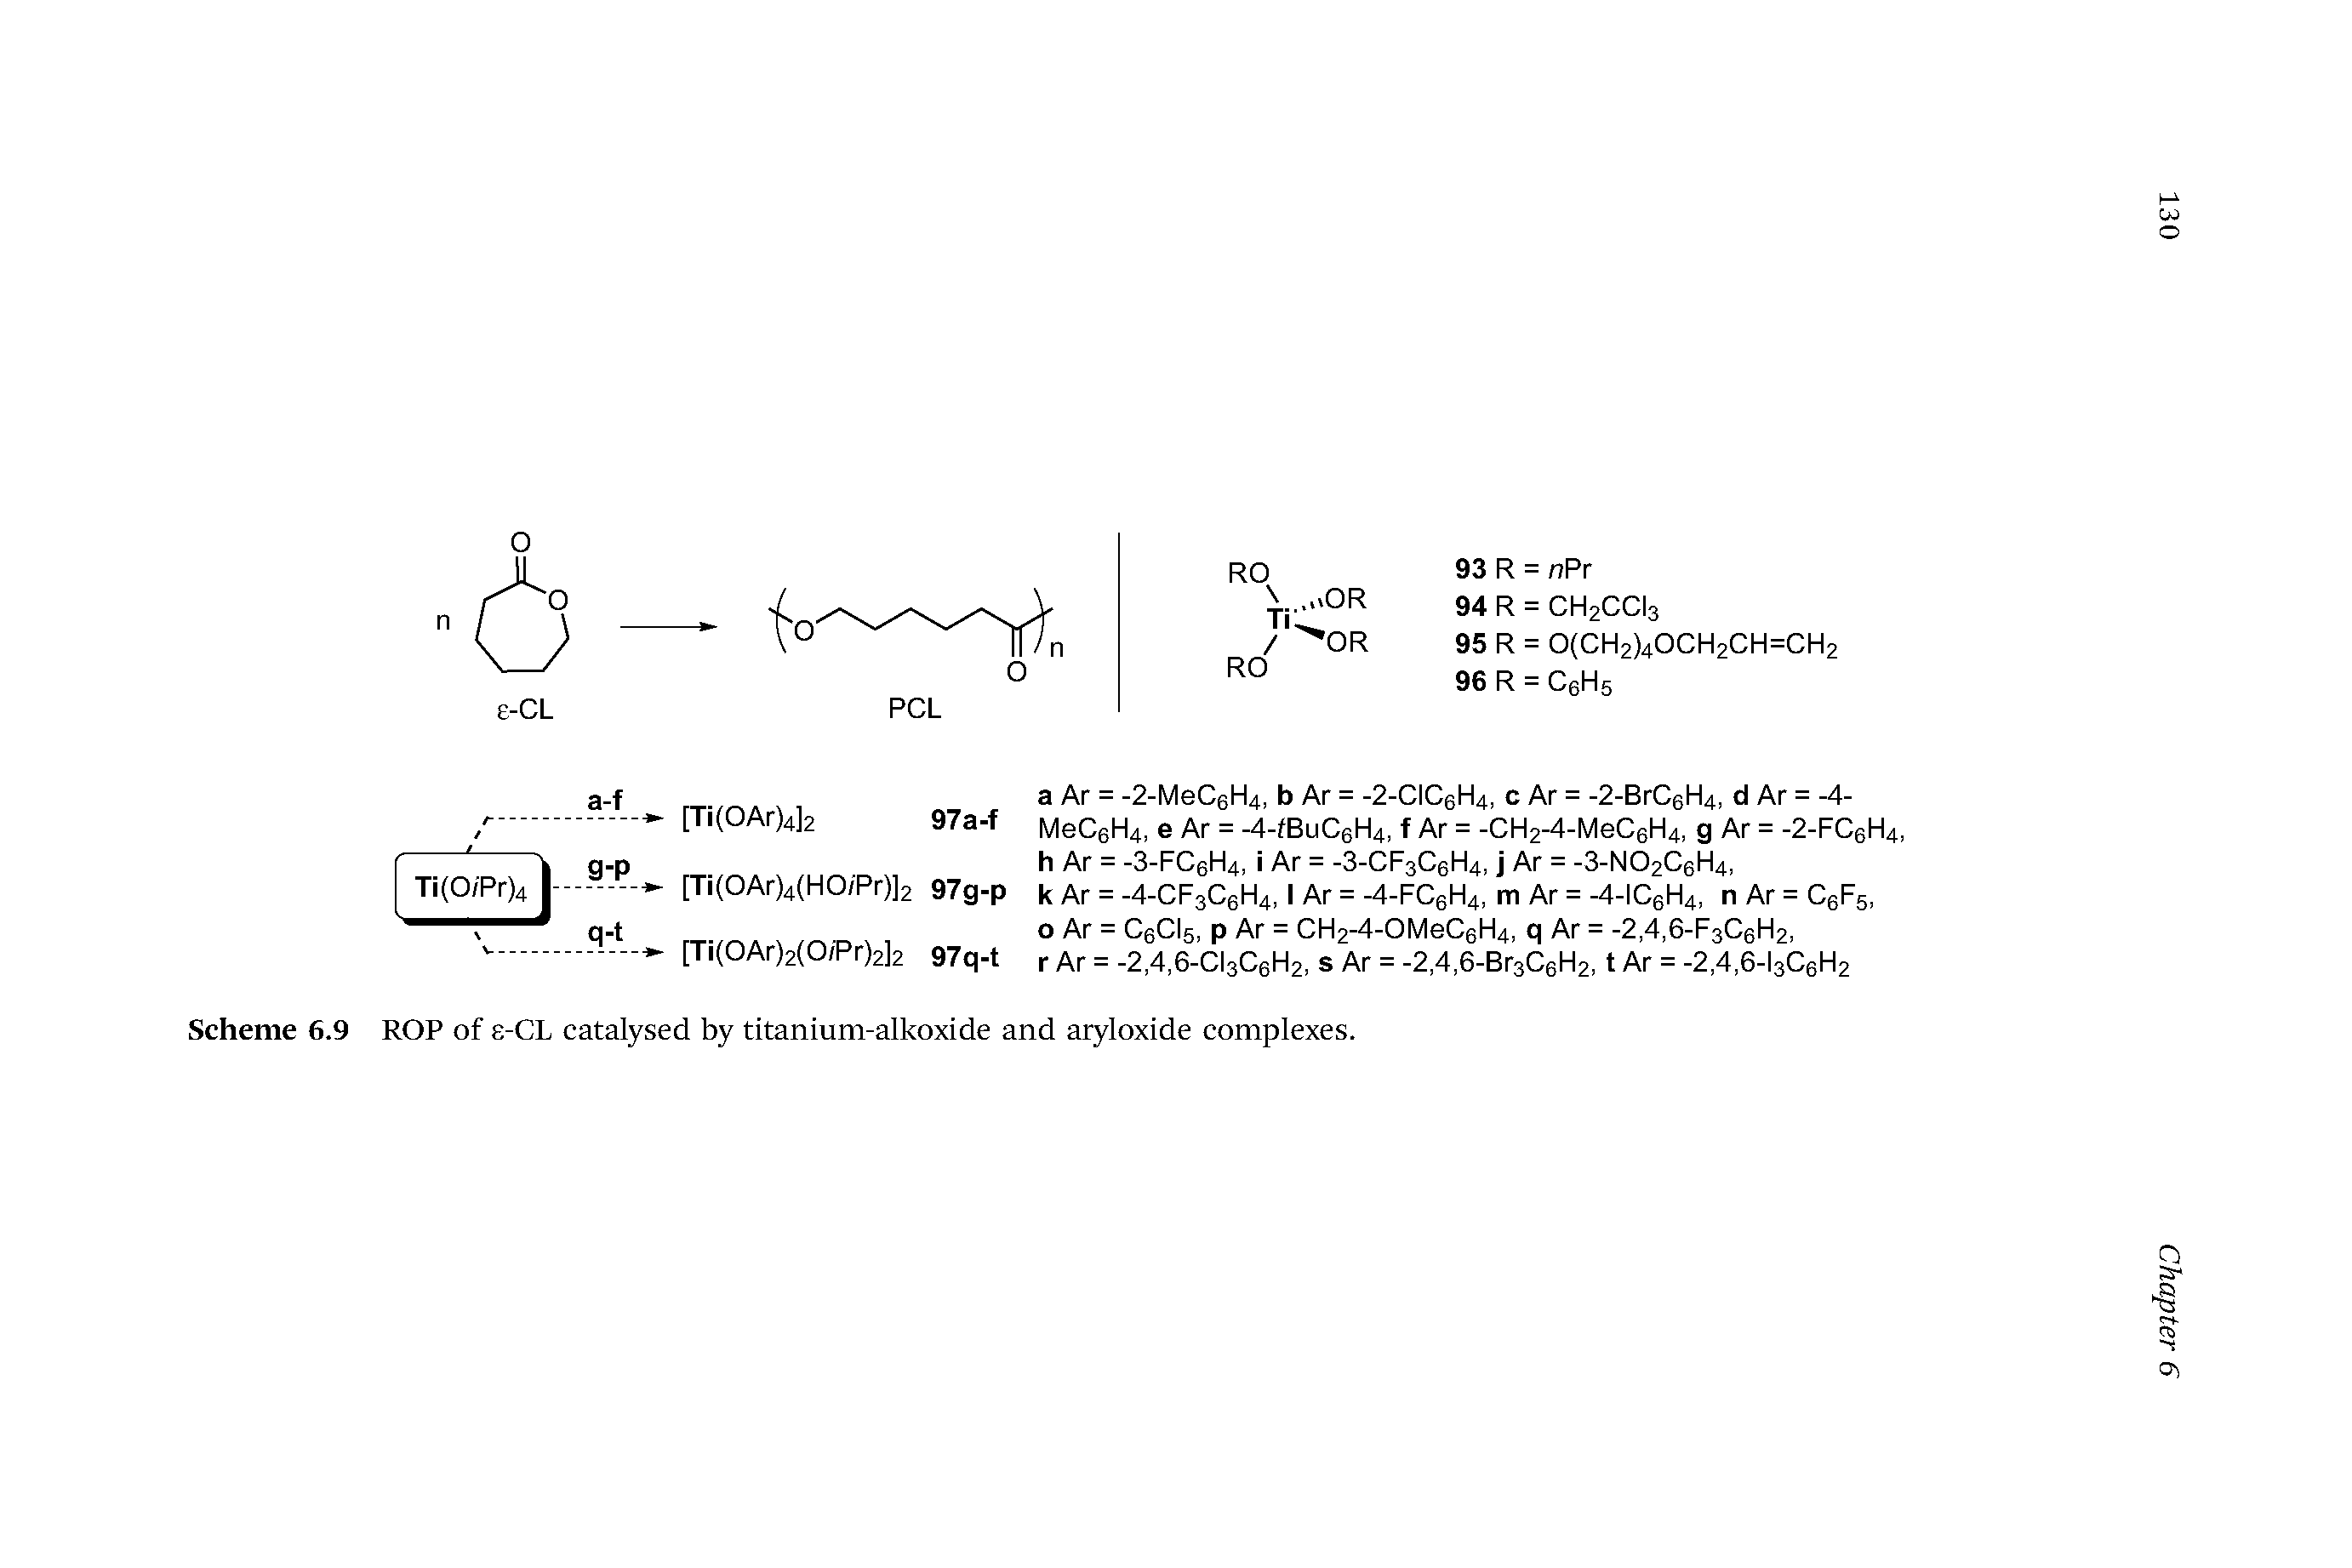 Scheme 6.9 ROP of s-CL catalysed by titanium-alkoxide and aryloxide complexes.